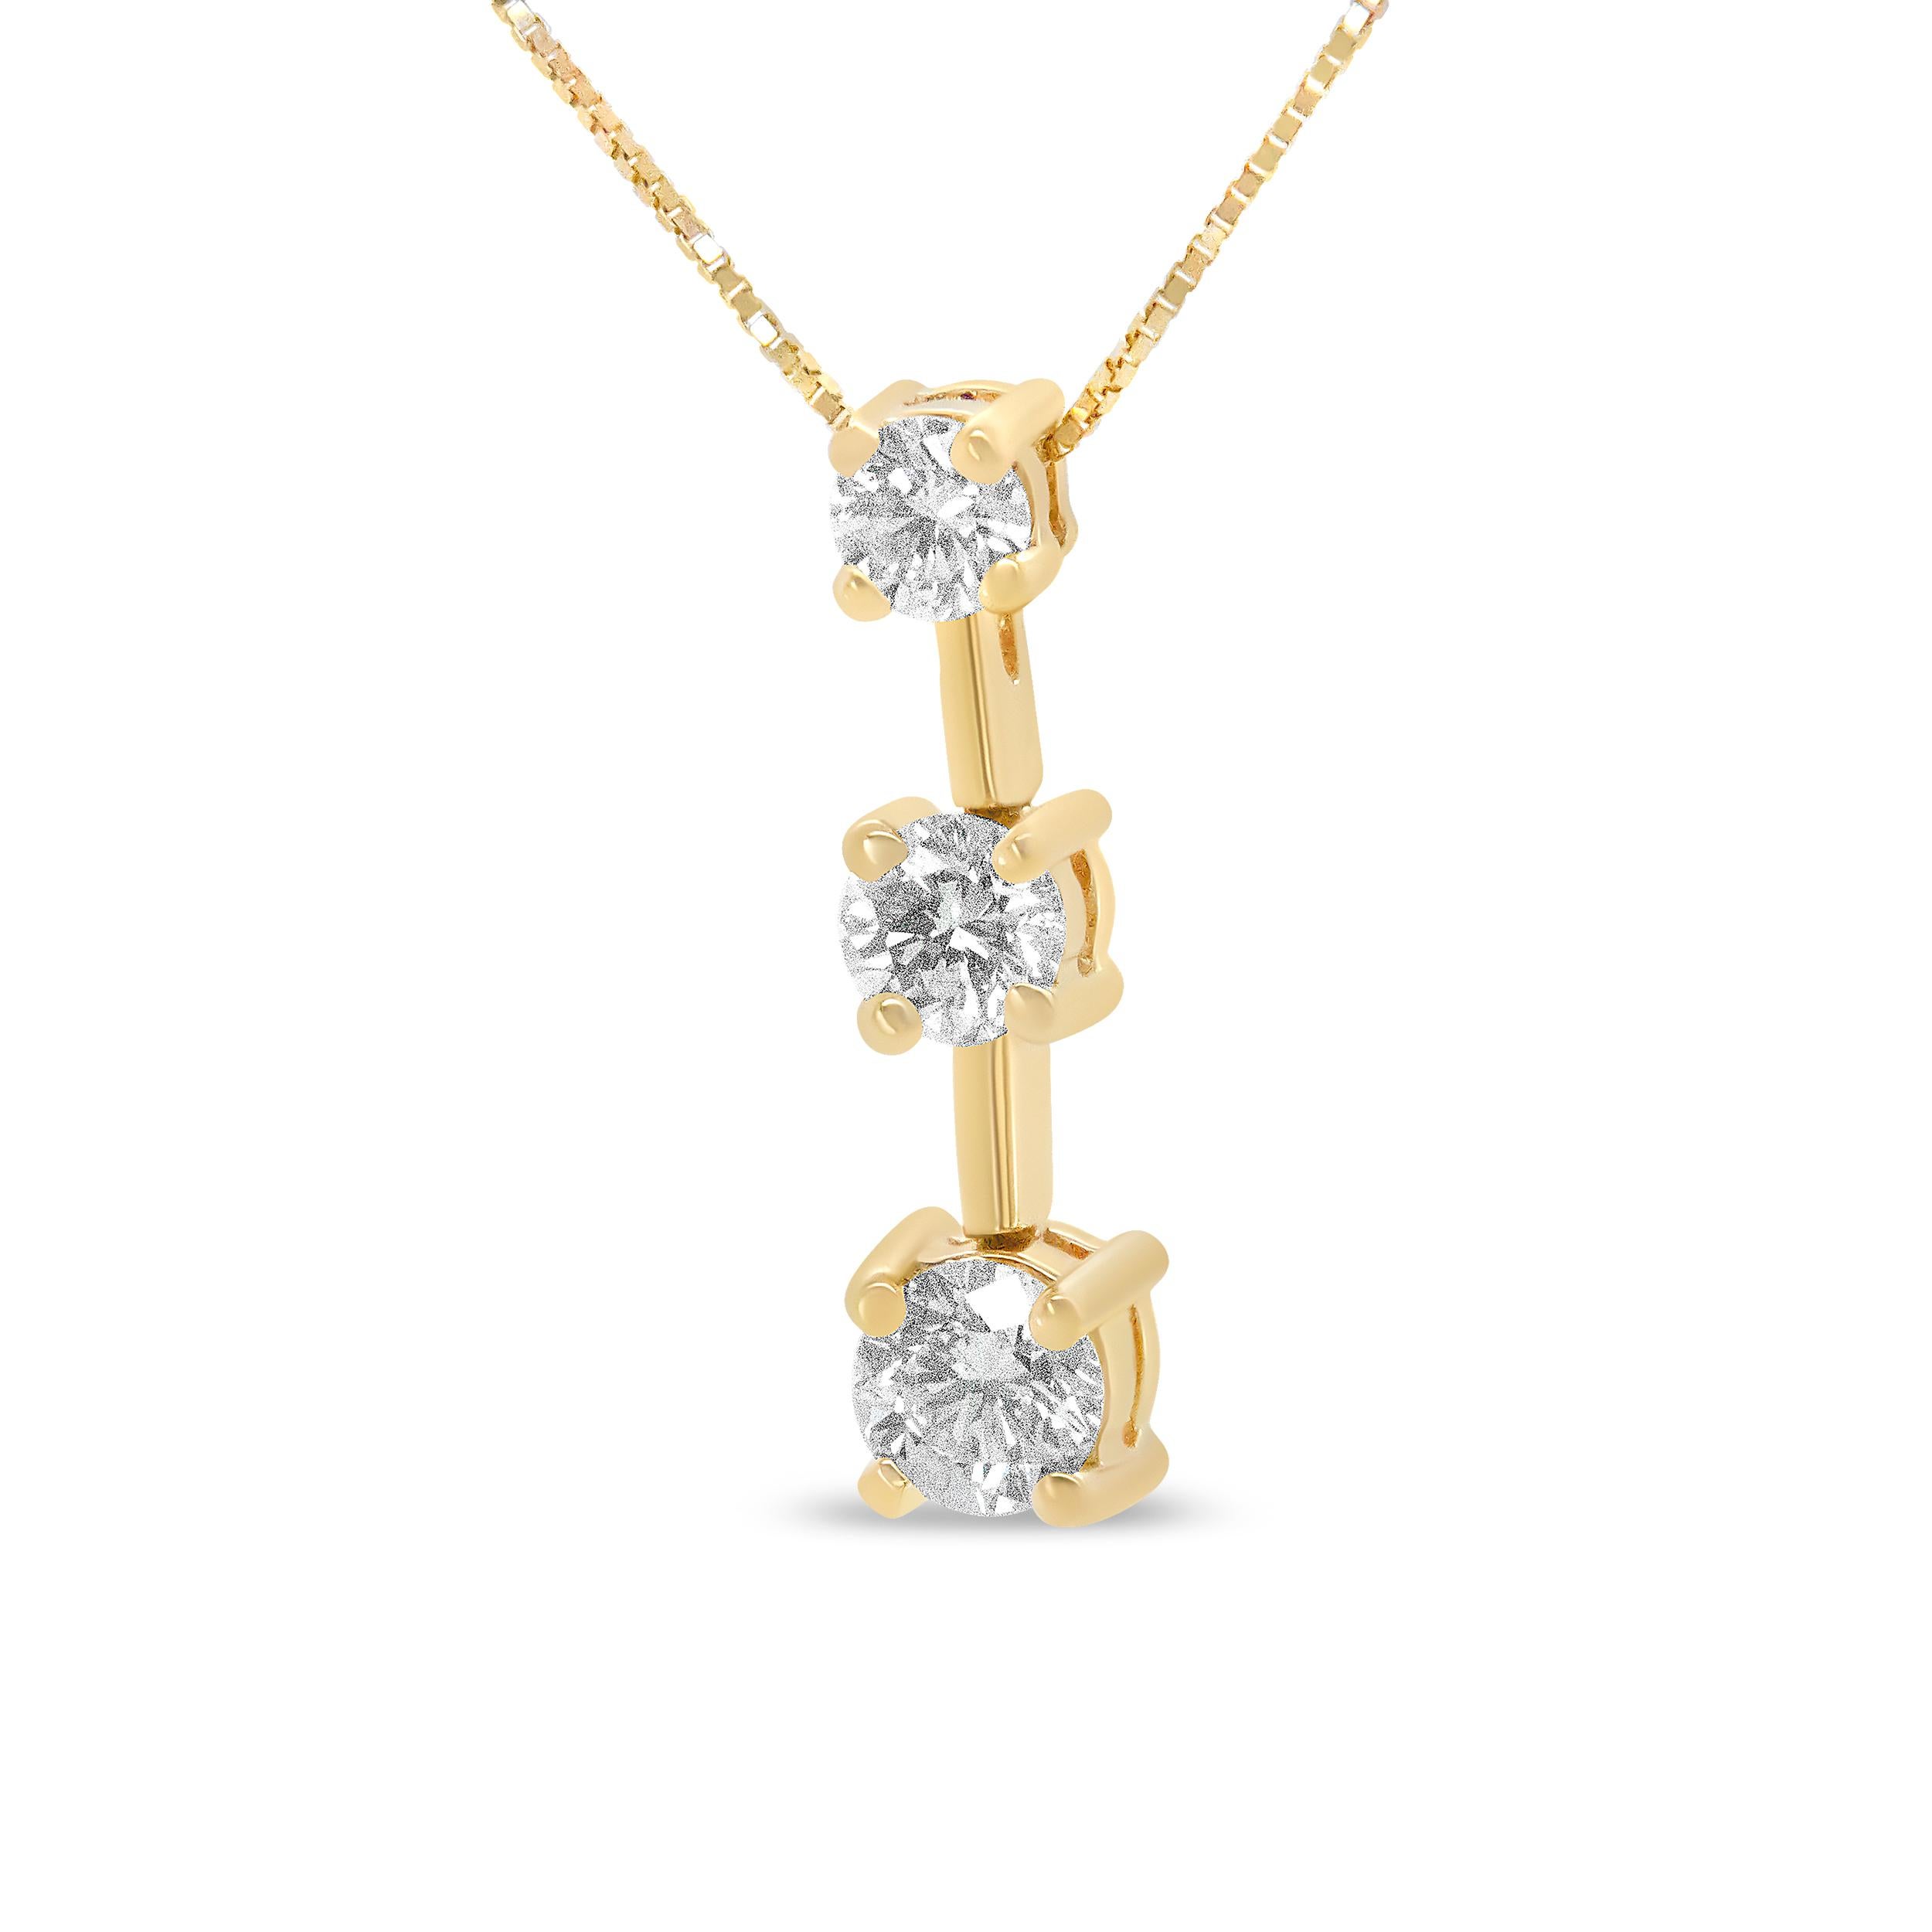 This three stone drop journey pendant necklace is a symbolic piece representing your past, present, and future. Three round diamonds in prong settings cascade downward in gradual sizes, with the diamonds totaling 1.00 cttw and an approximate H-I